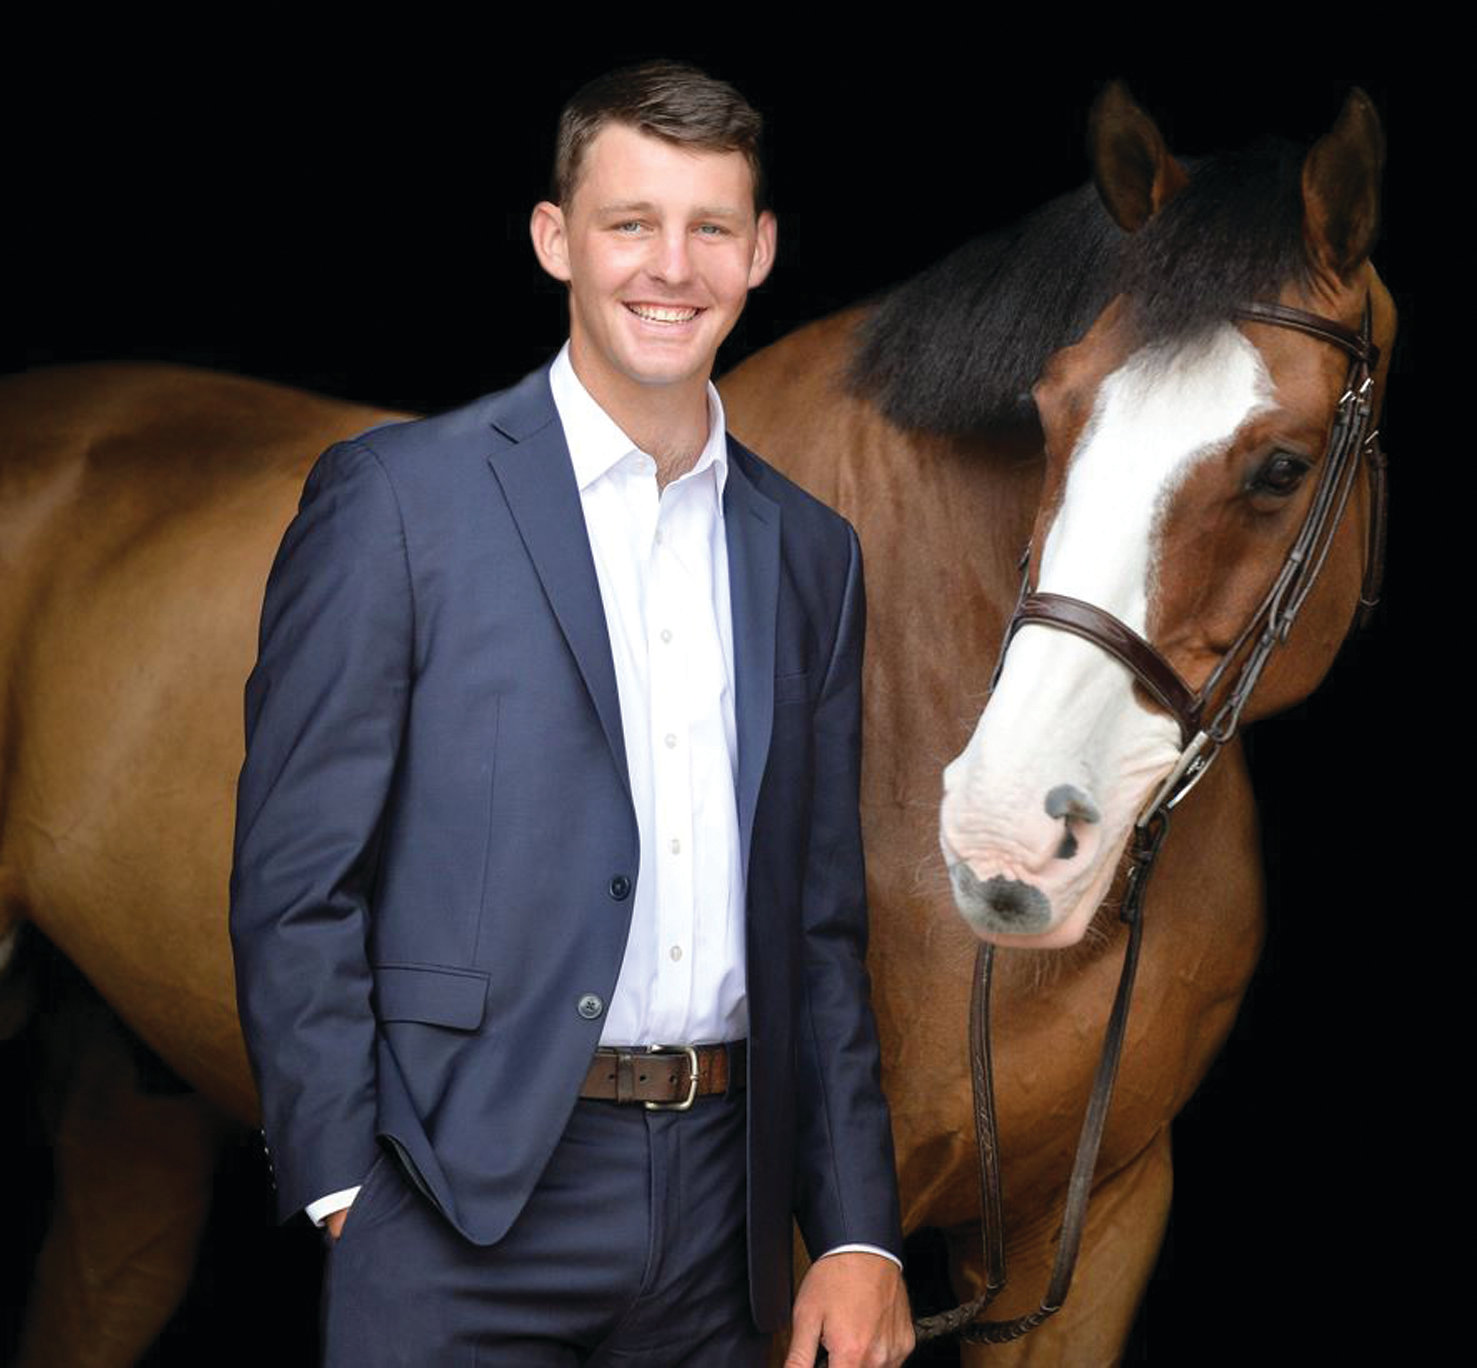 BIG GOALS: Warwick native Michael Janson hopes to one day compete in international equestrian events, including the Olympics.